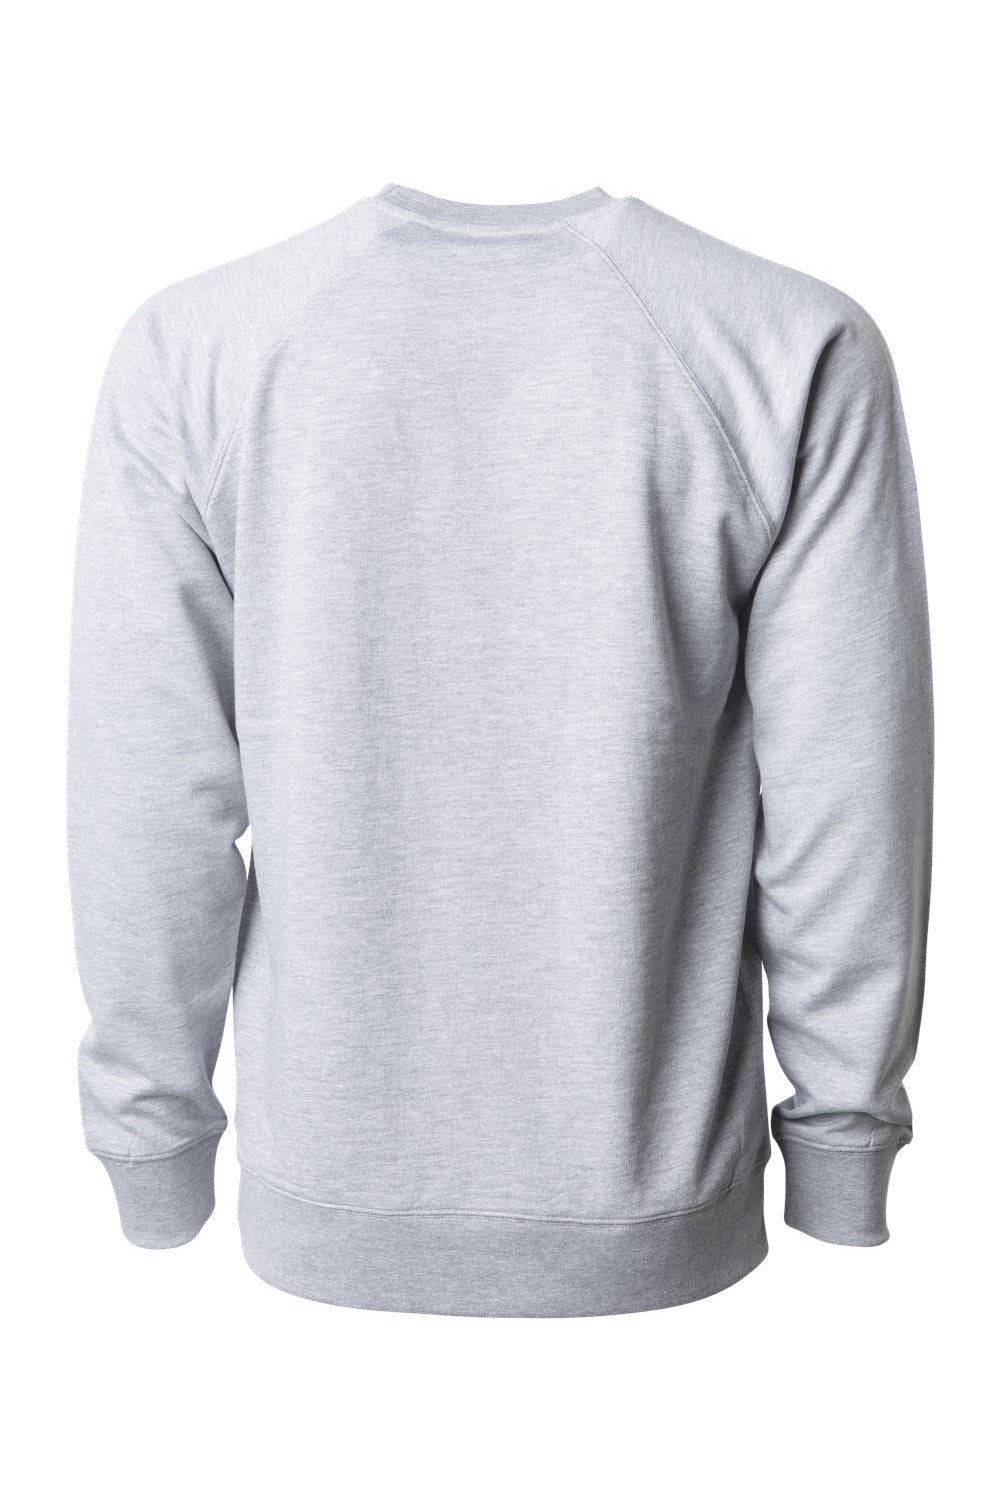 Independent Trading Co. SS1000C Mens Icon Loopback Terry Crewneck Sweatshirt Heather Grey Flat Back